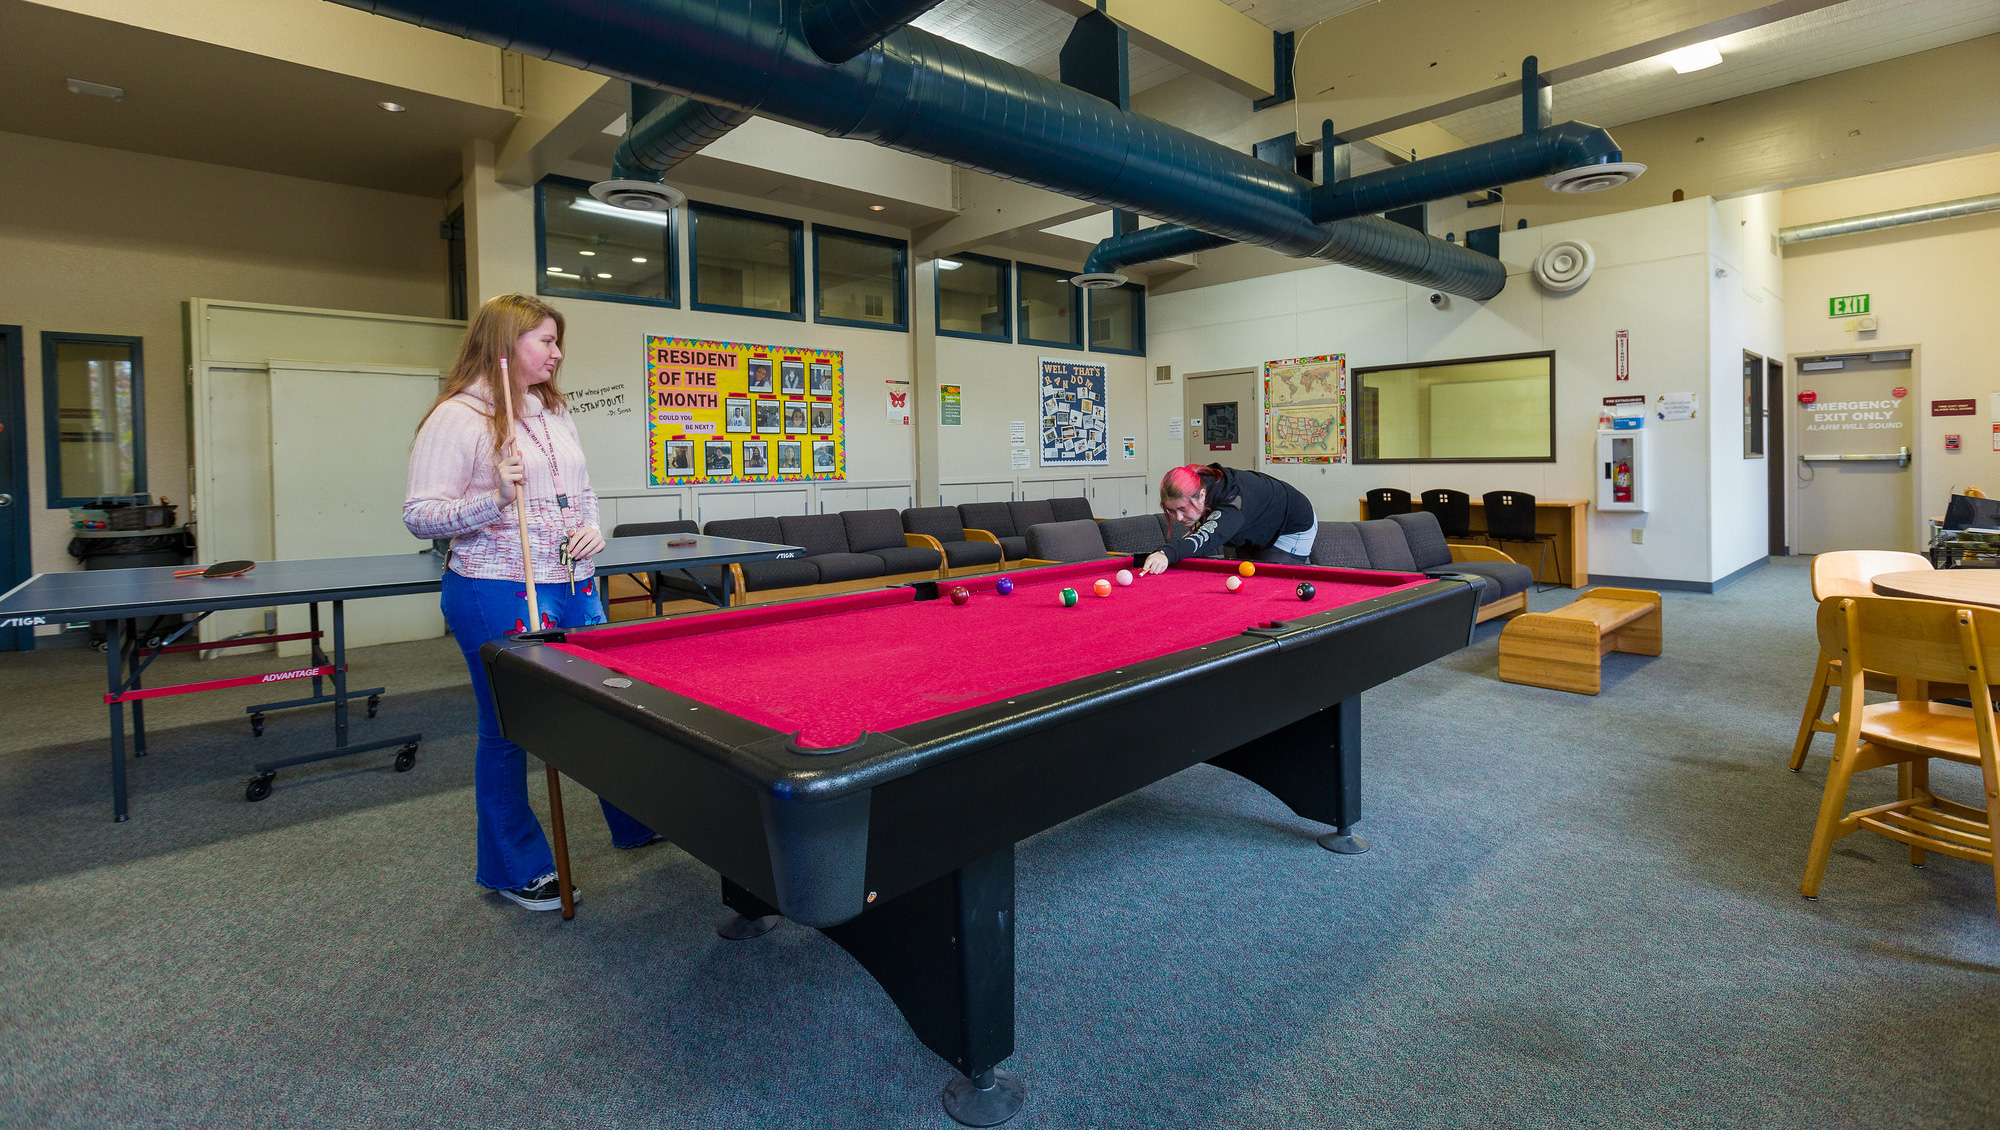 Students in recreation room playing pool